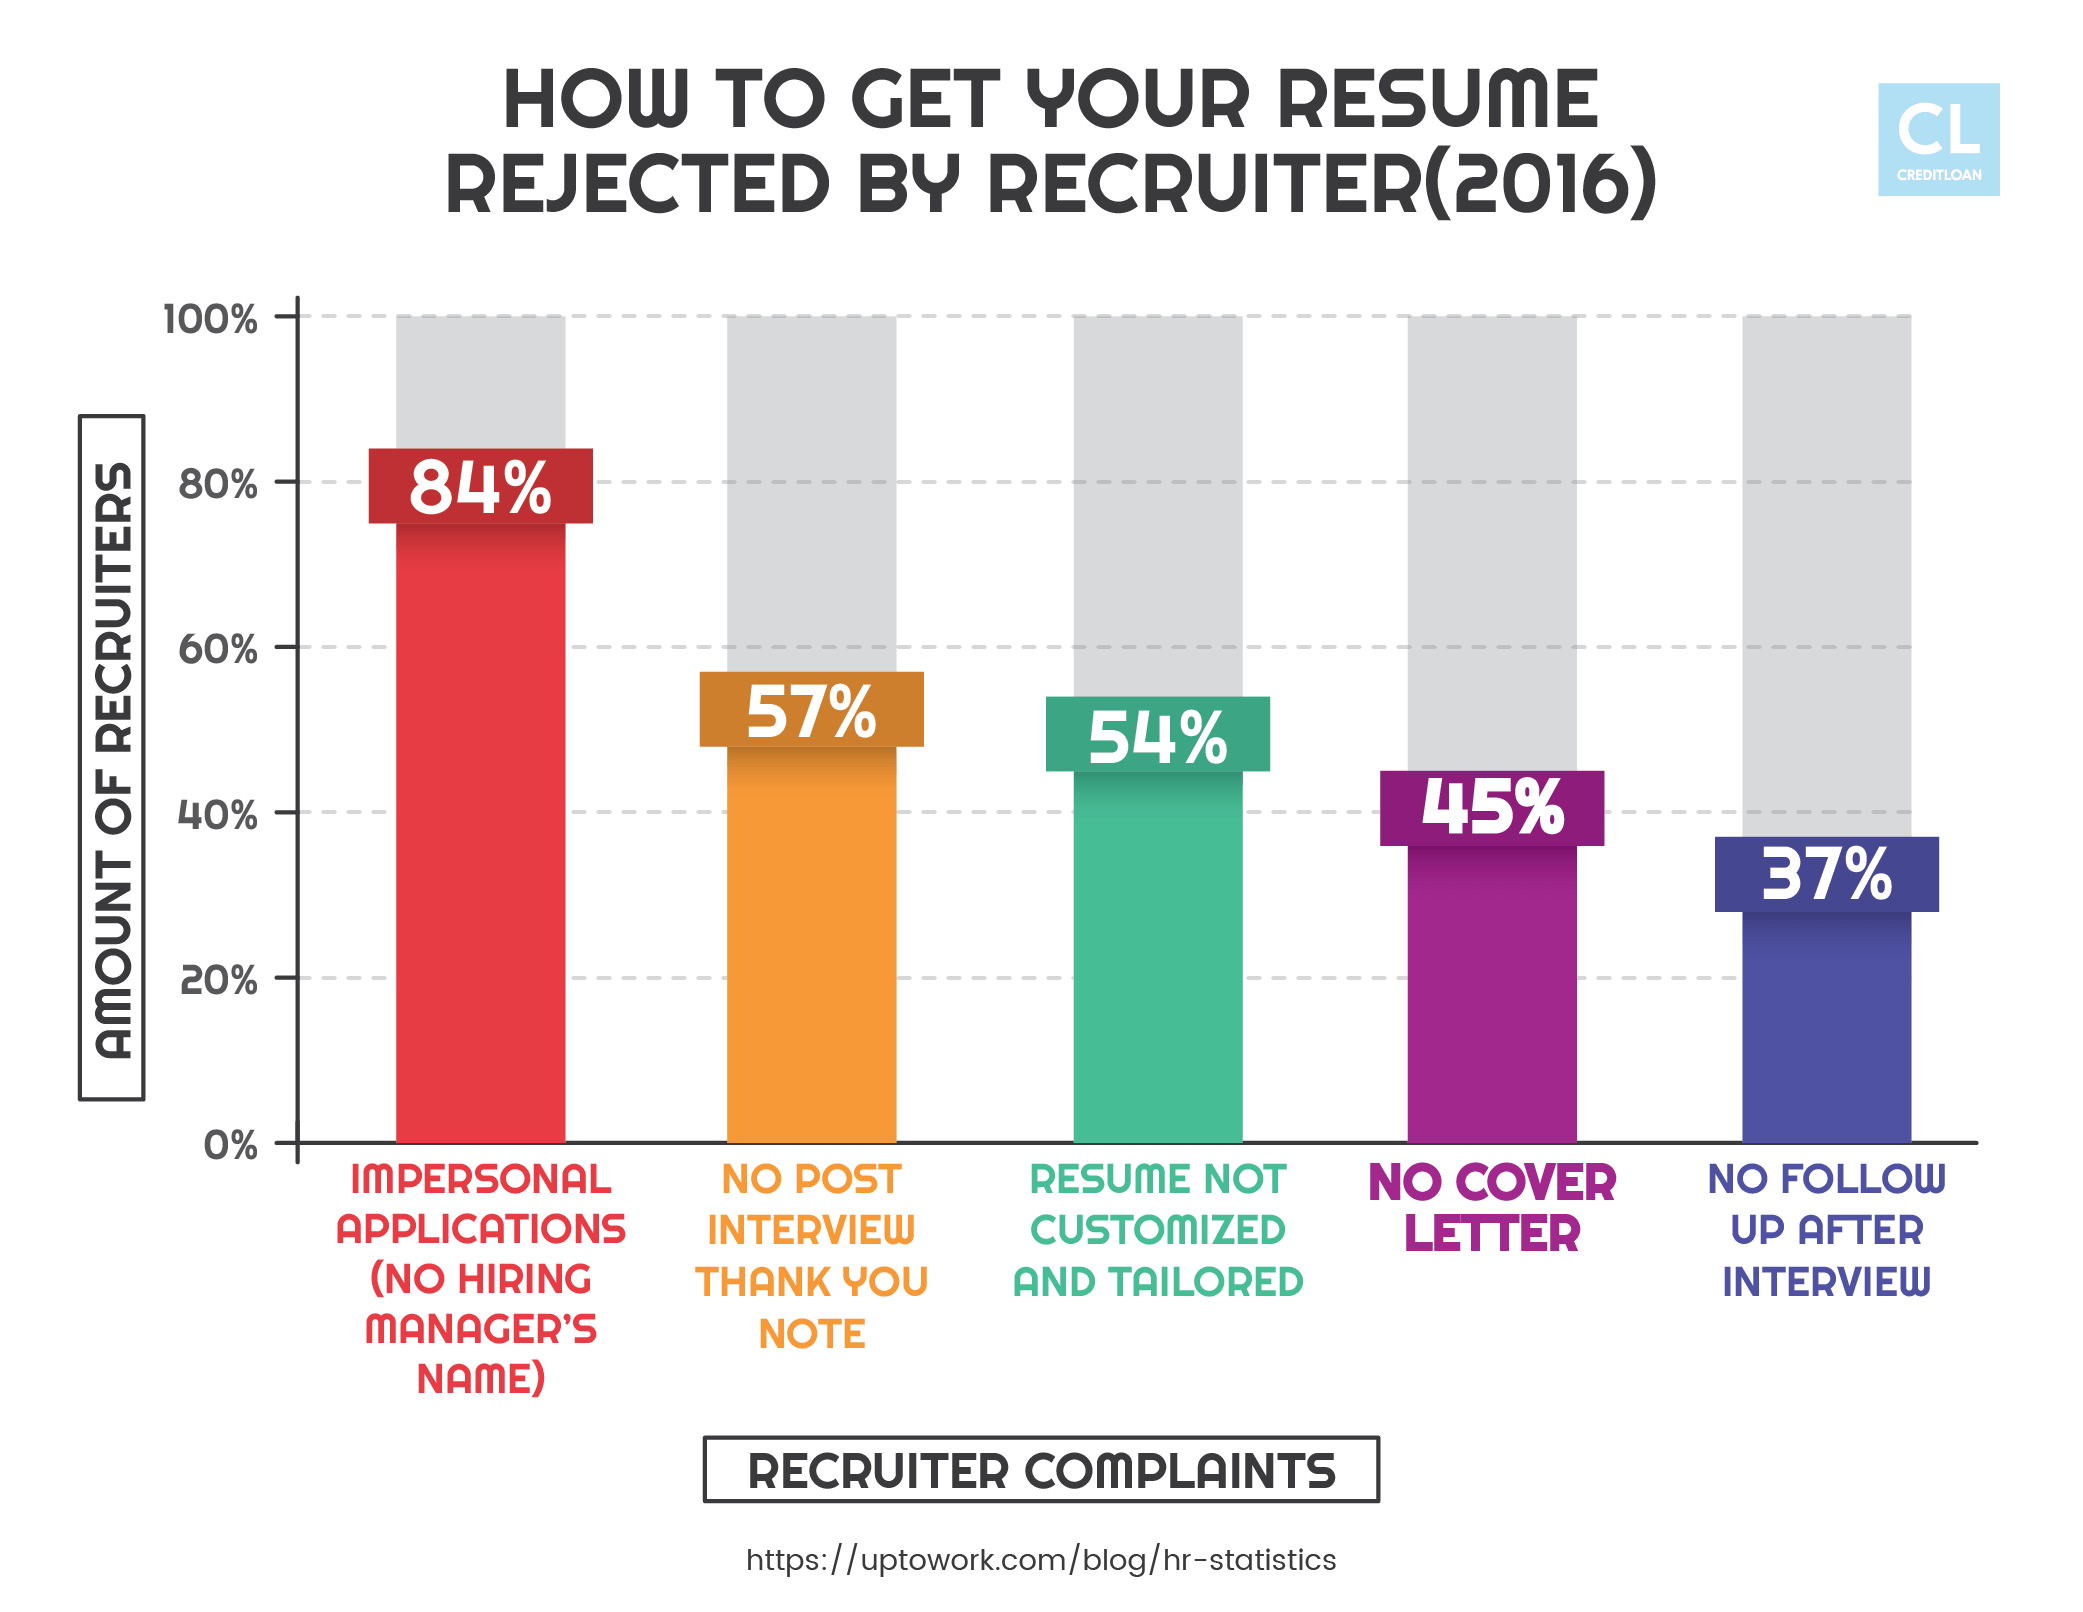 Data on Resume Complaints and Rejections